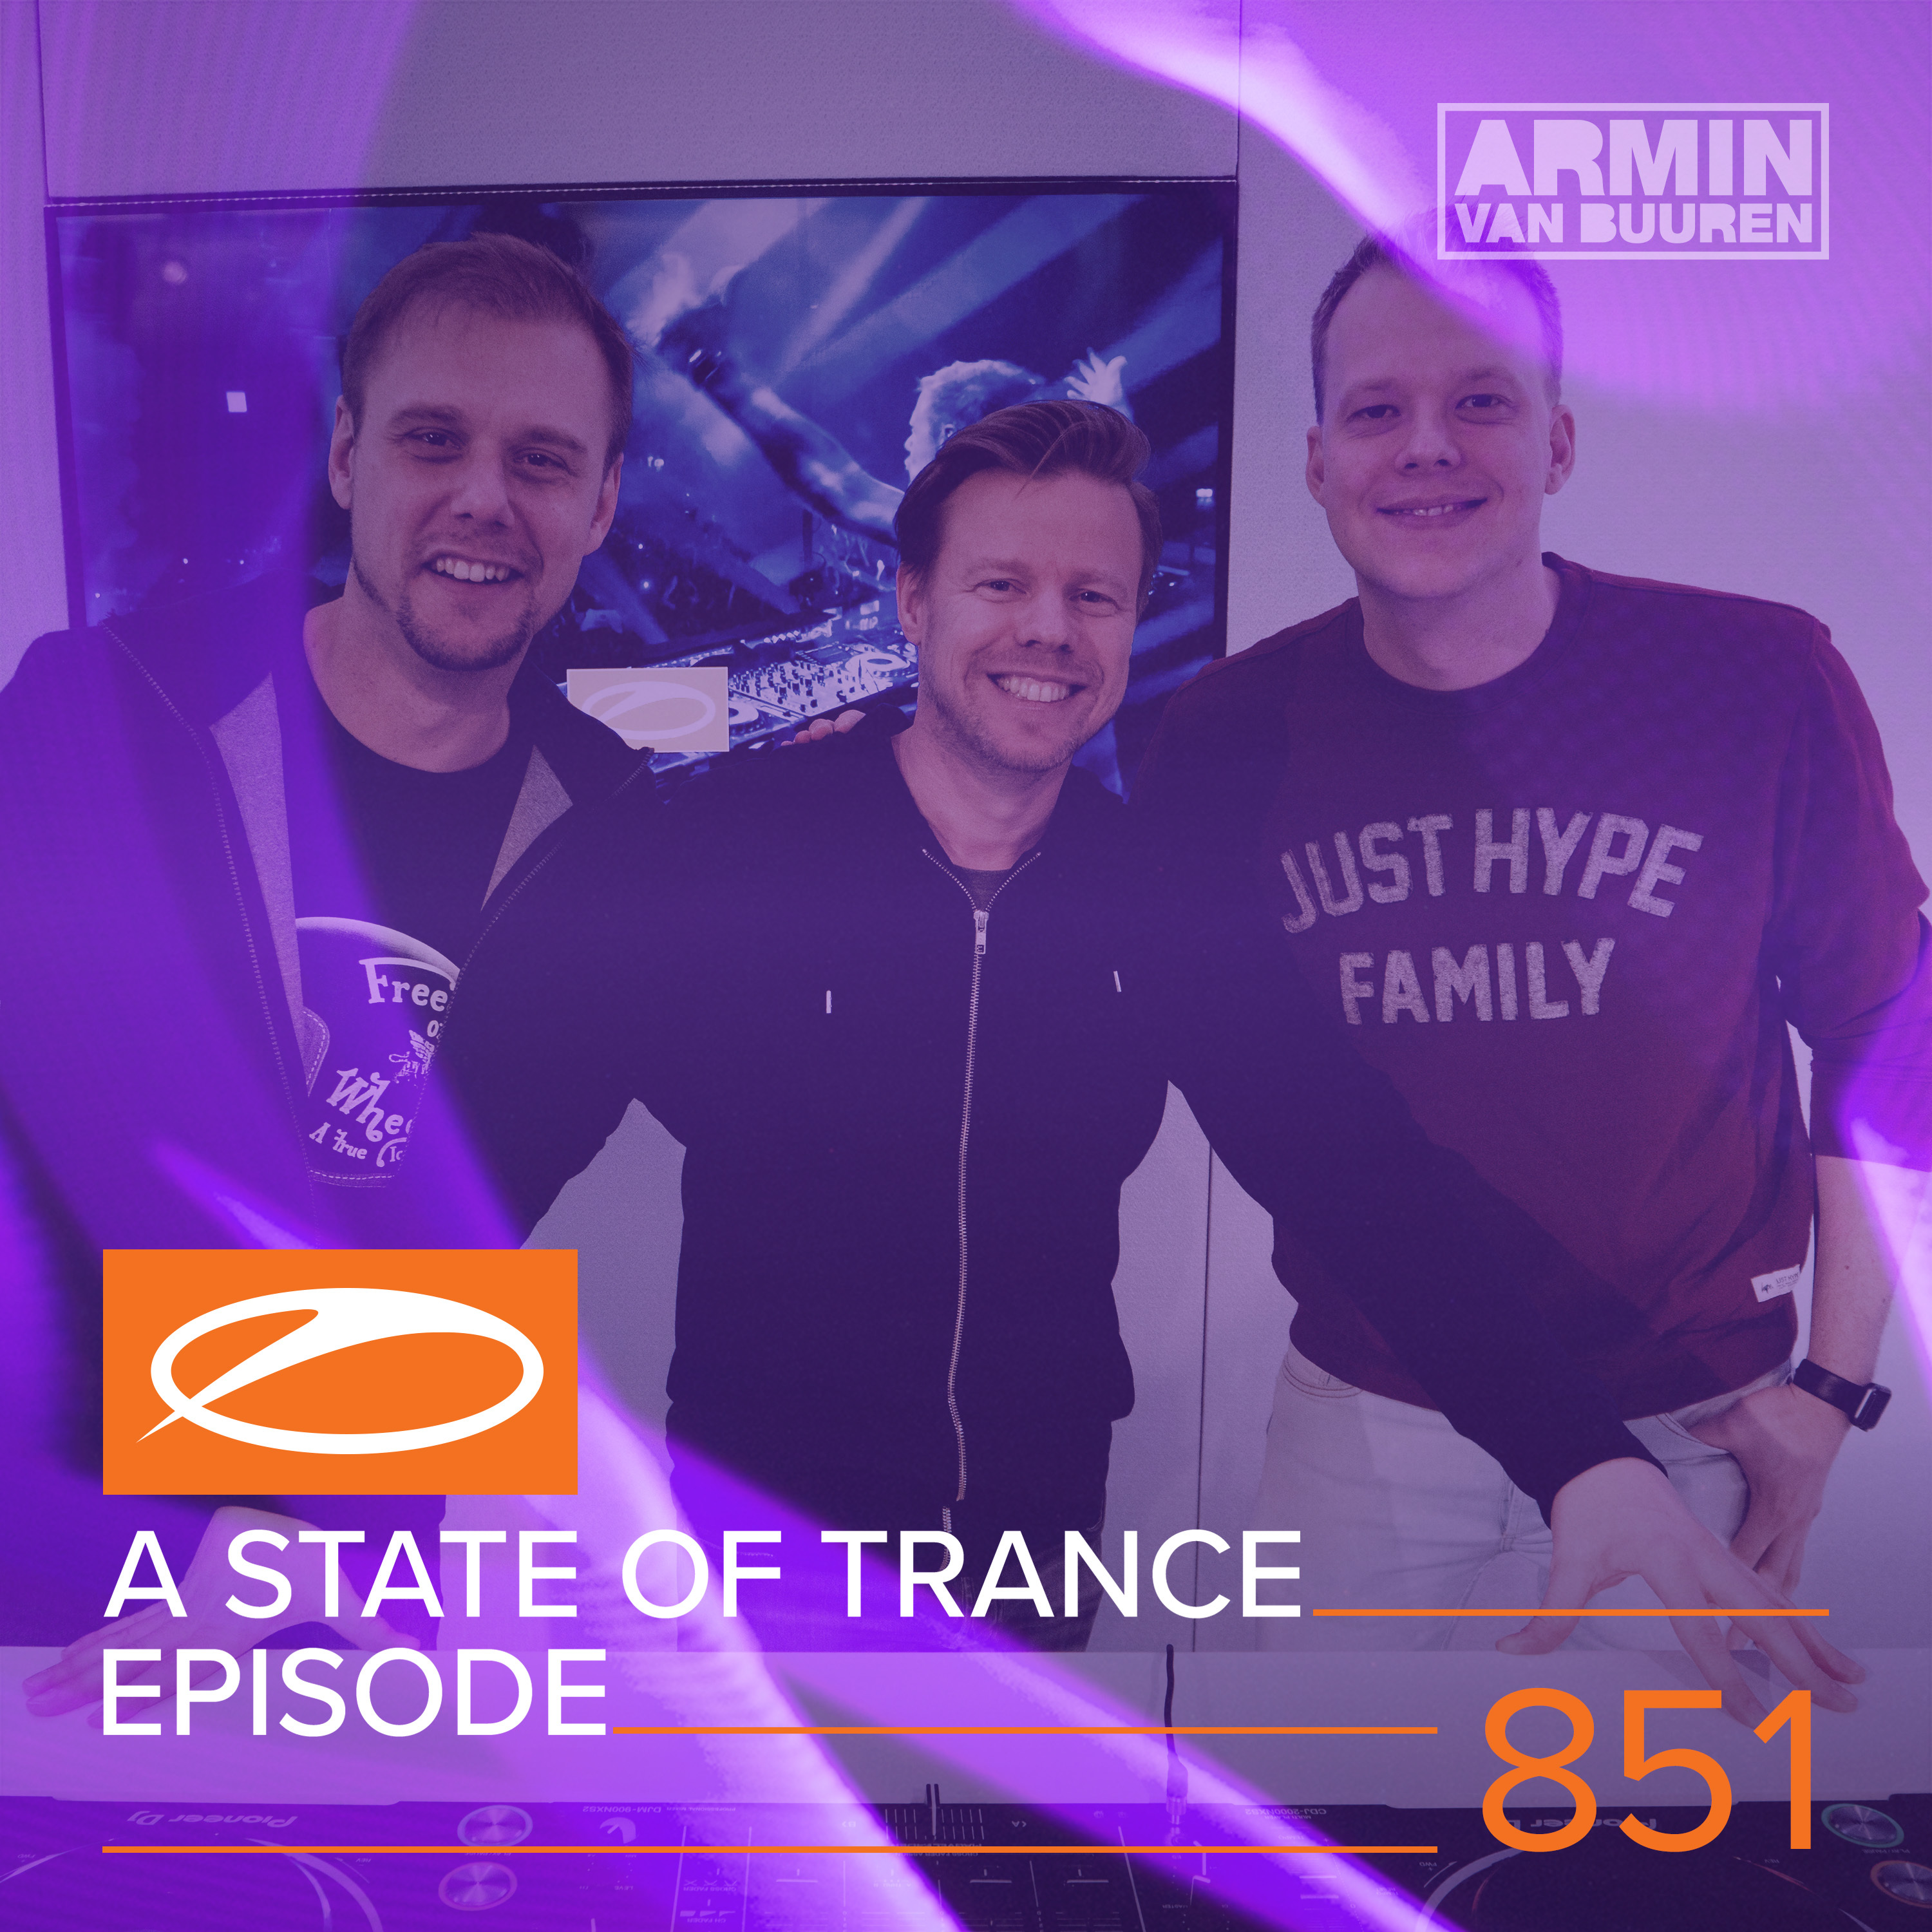 A State Of Trance Episode 851